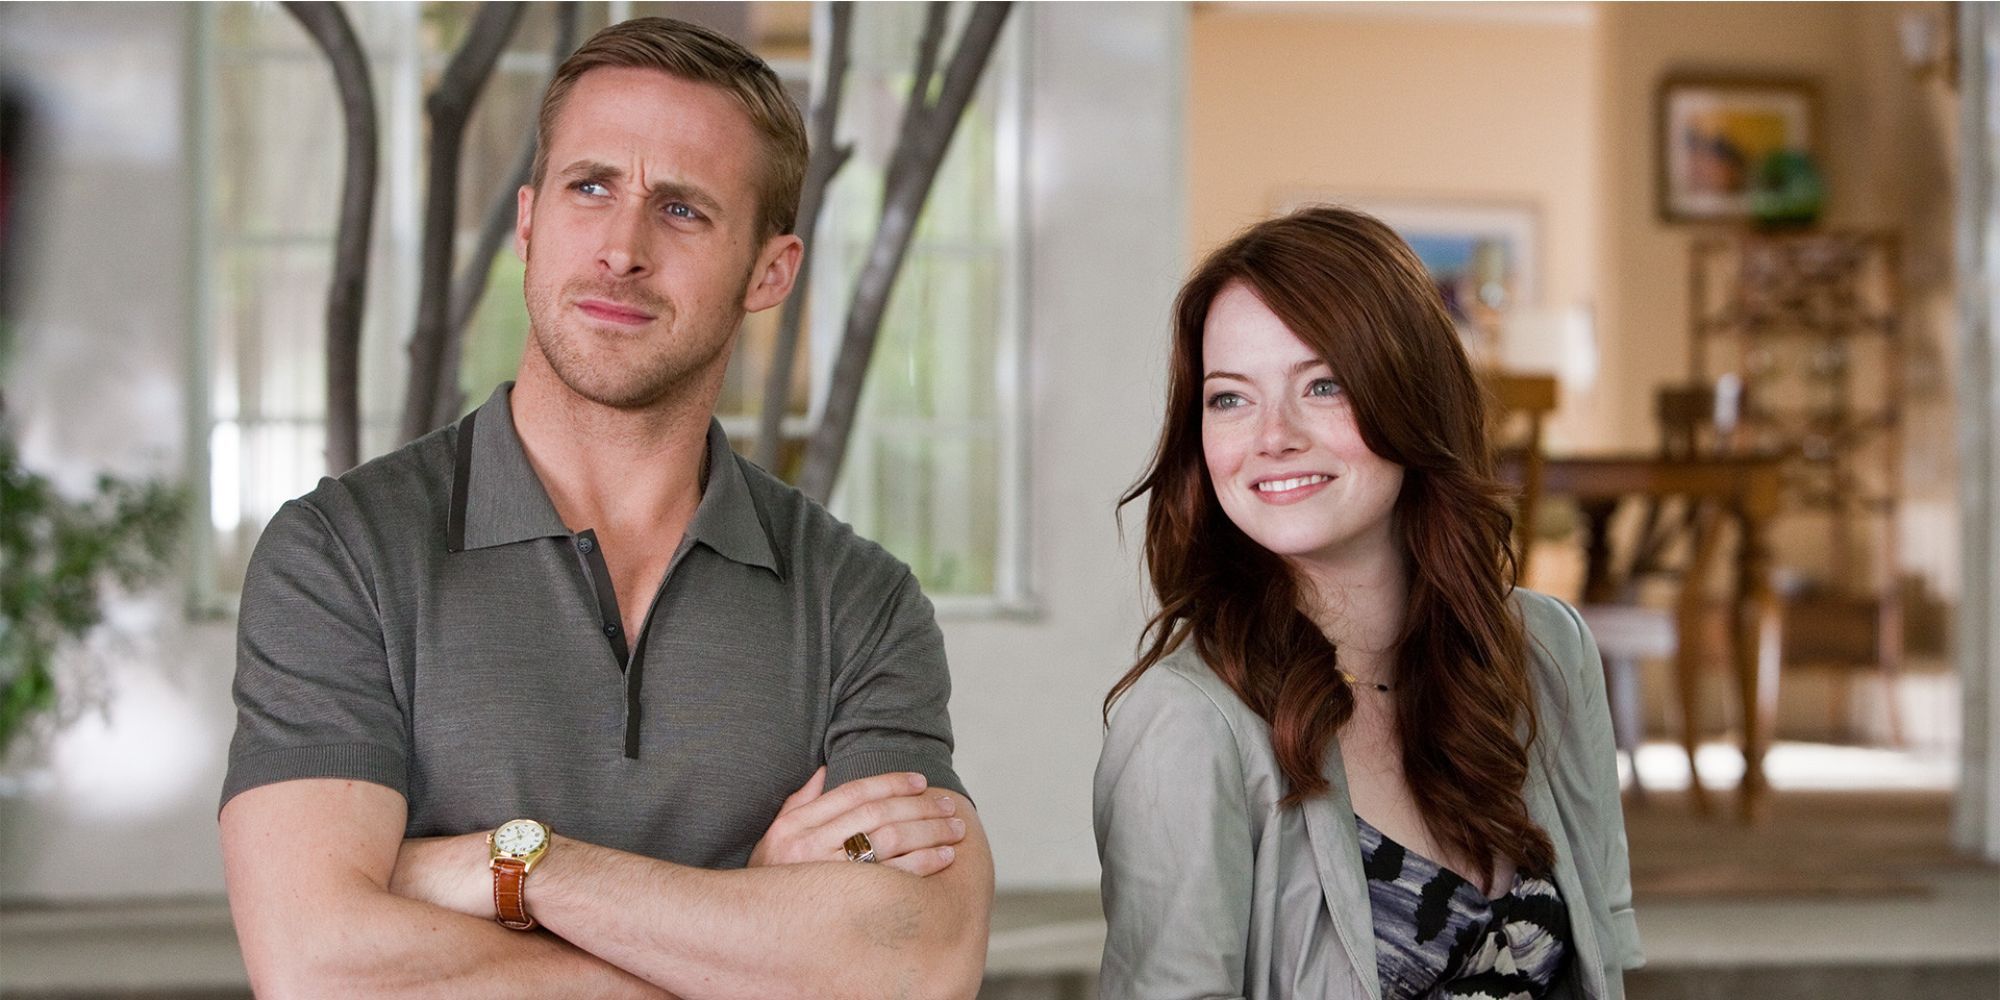 Jacob and Hannah from Crazy, Stupid, Love standing together